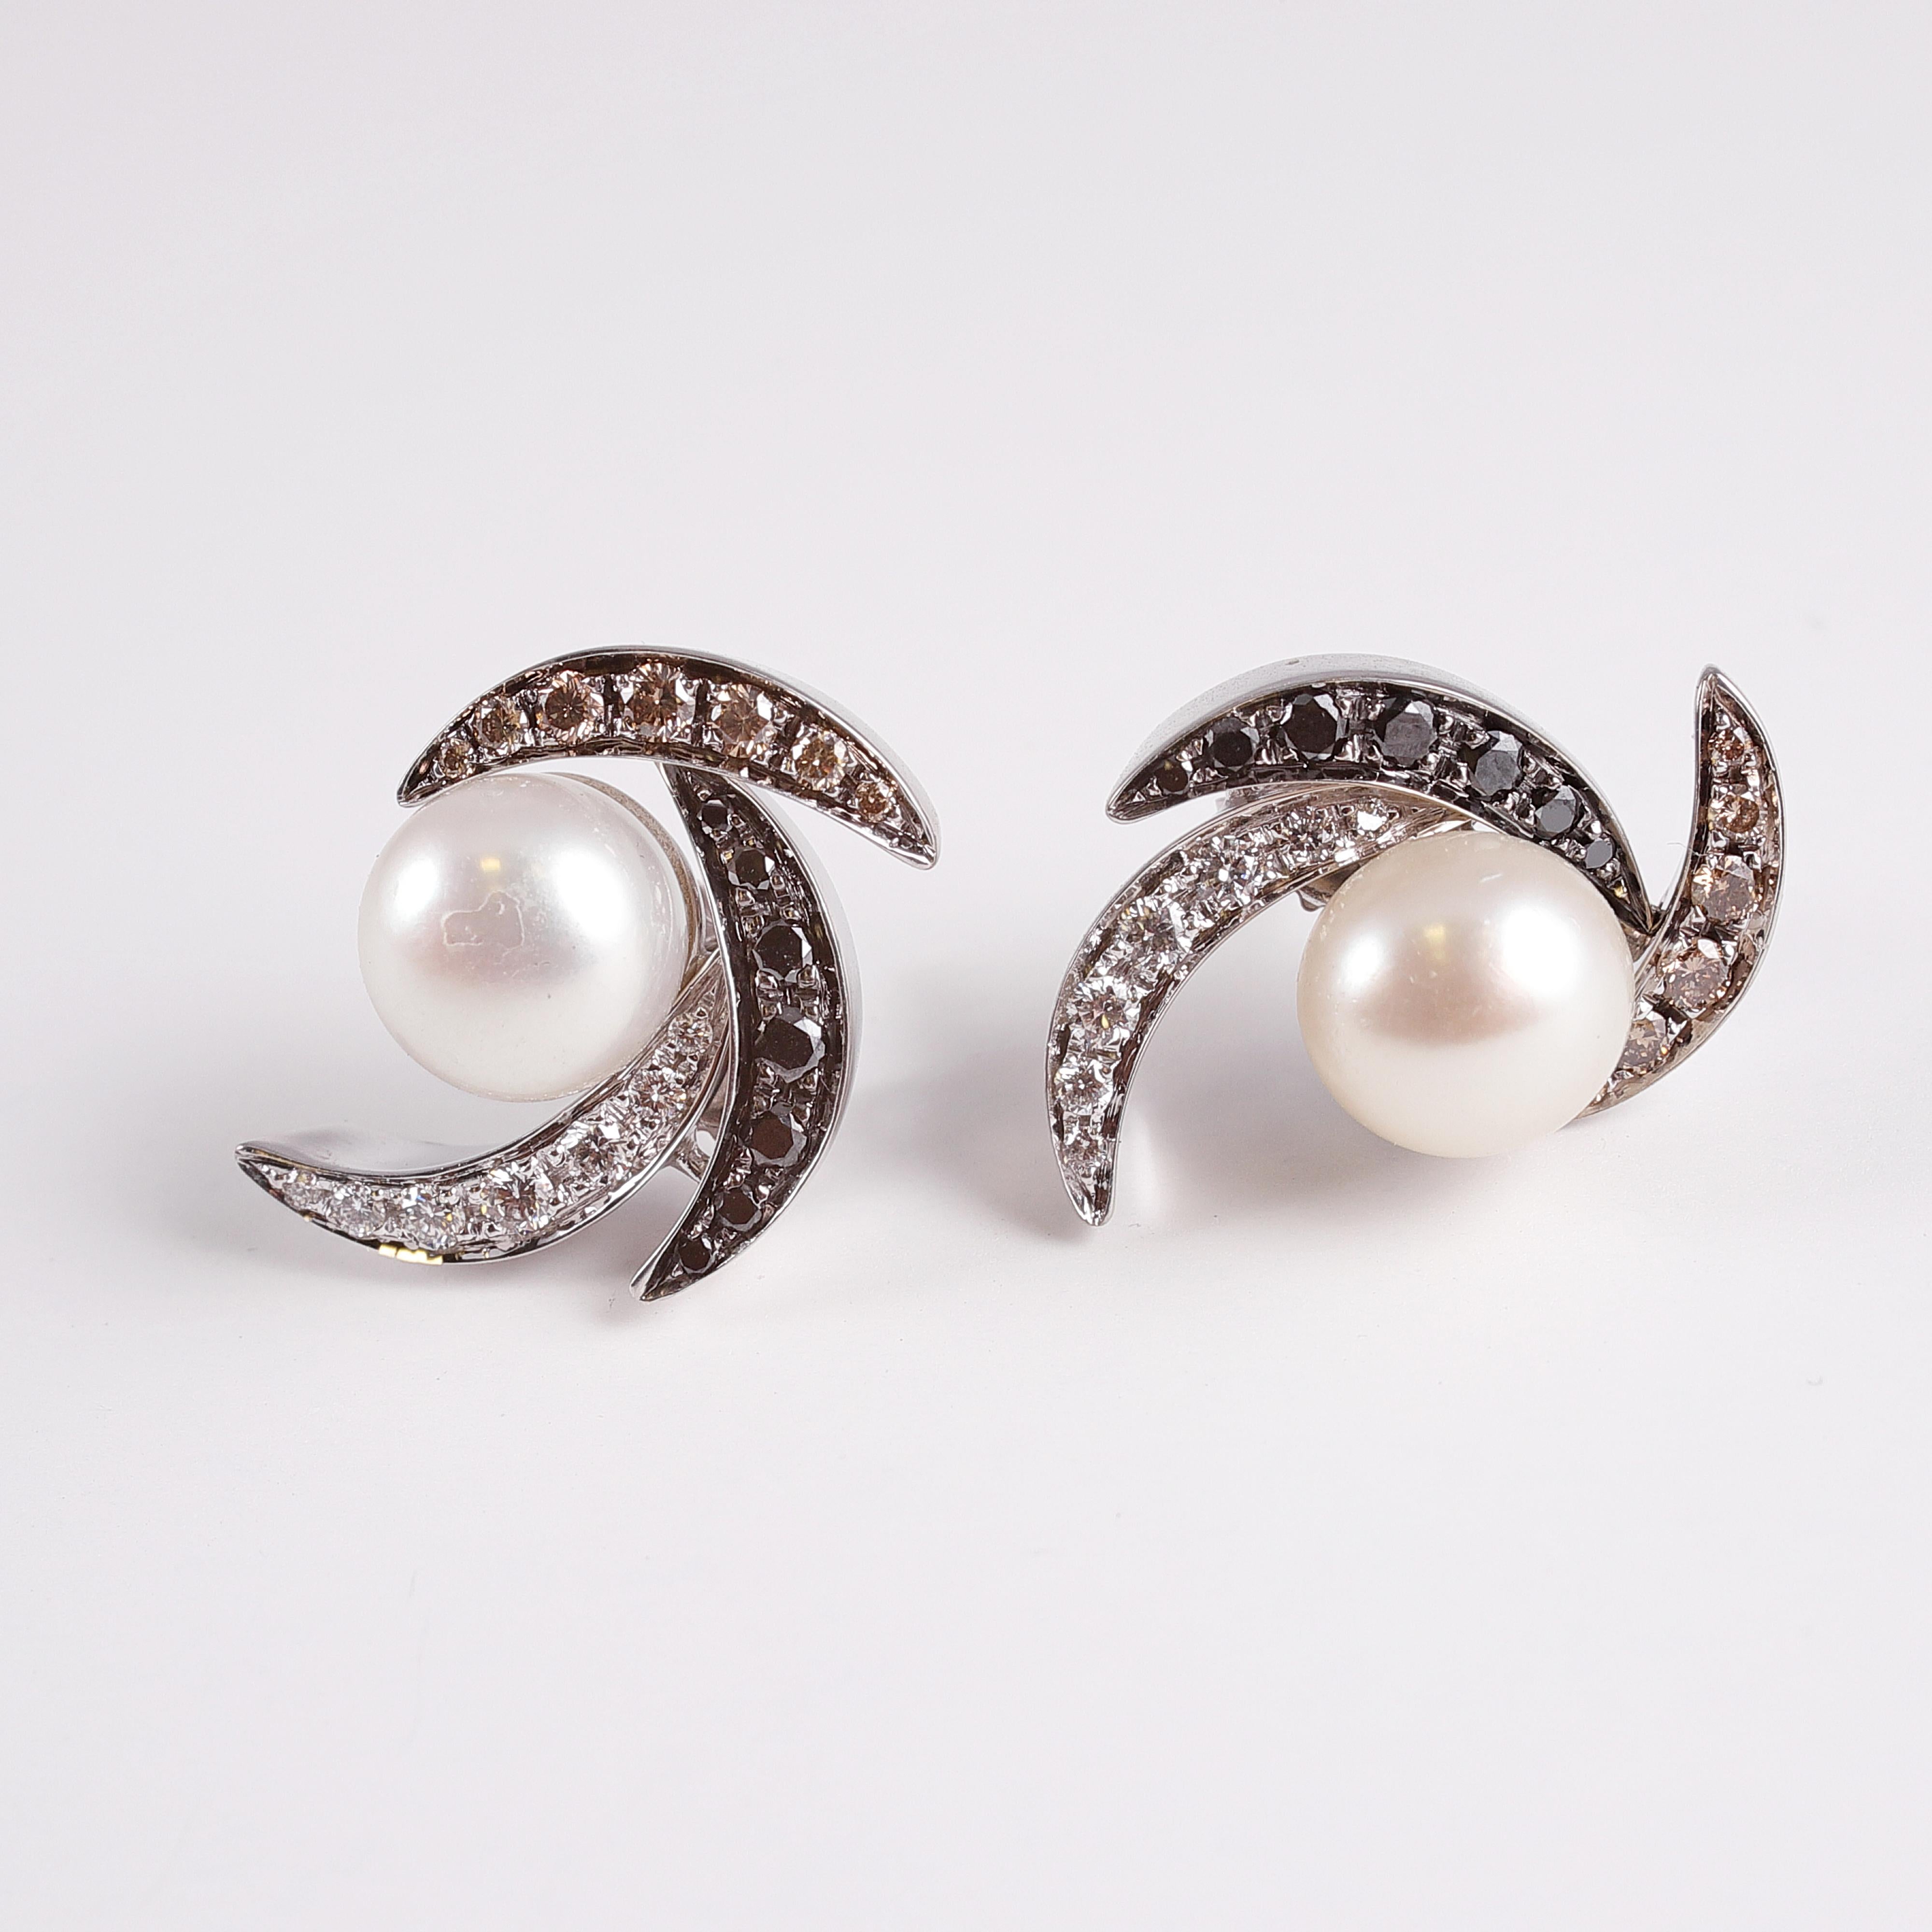 Cultured button pearls with white, chocolate and black diamond 